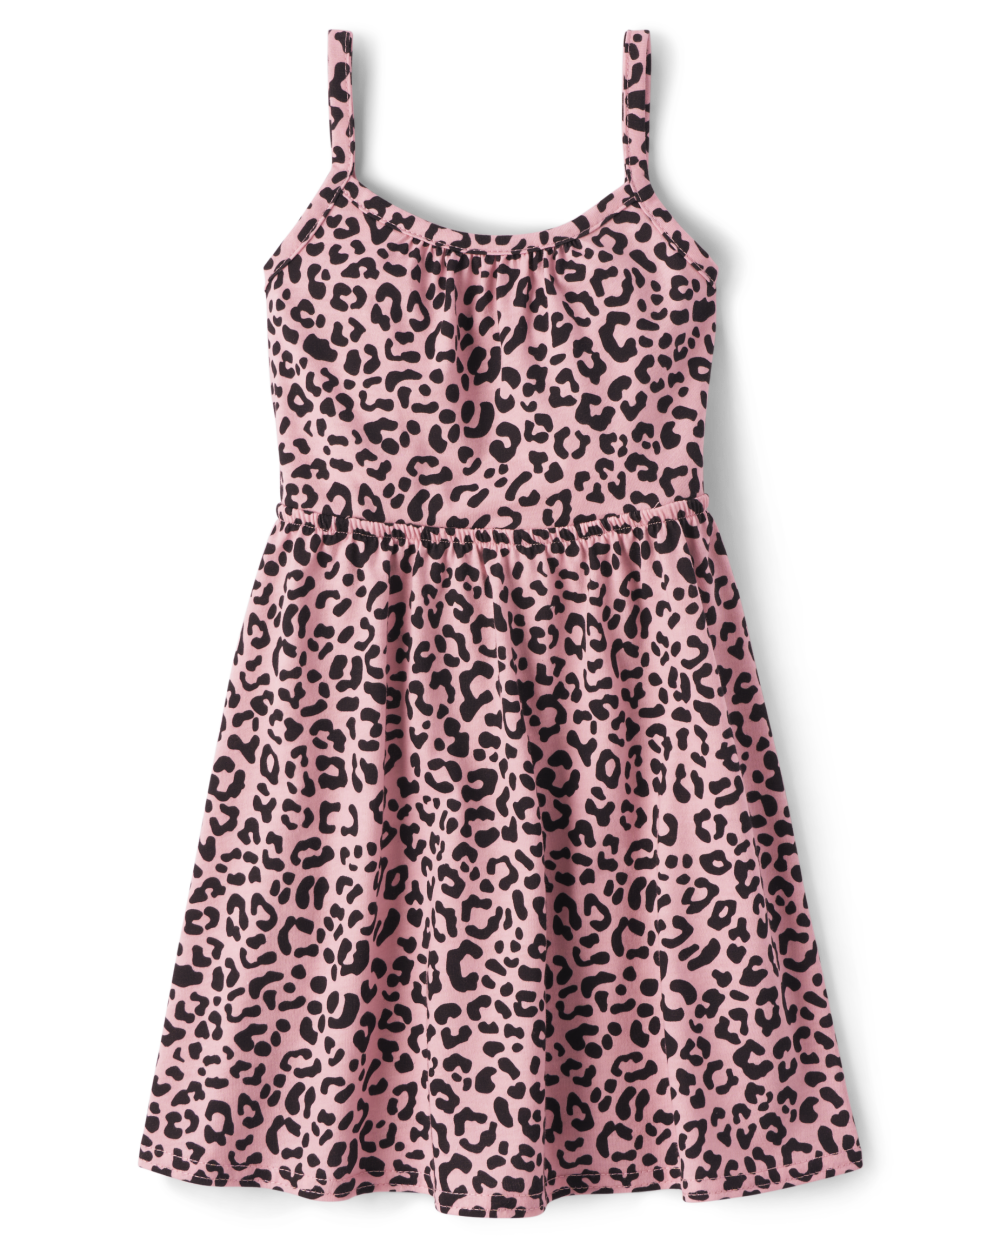 Toddler Baby Sleeveless Cutout Above the Knee Animal Leopard Print Dress With a Bow(s)